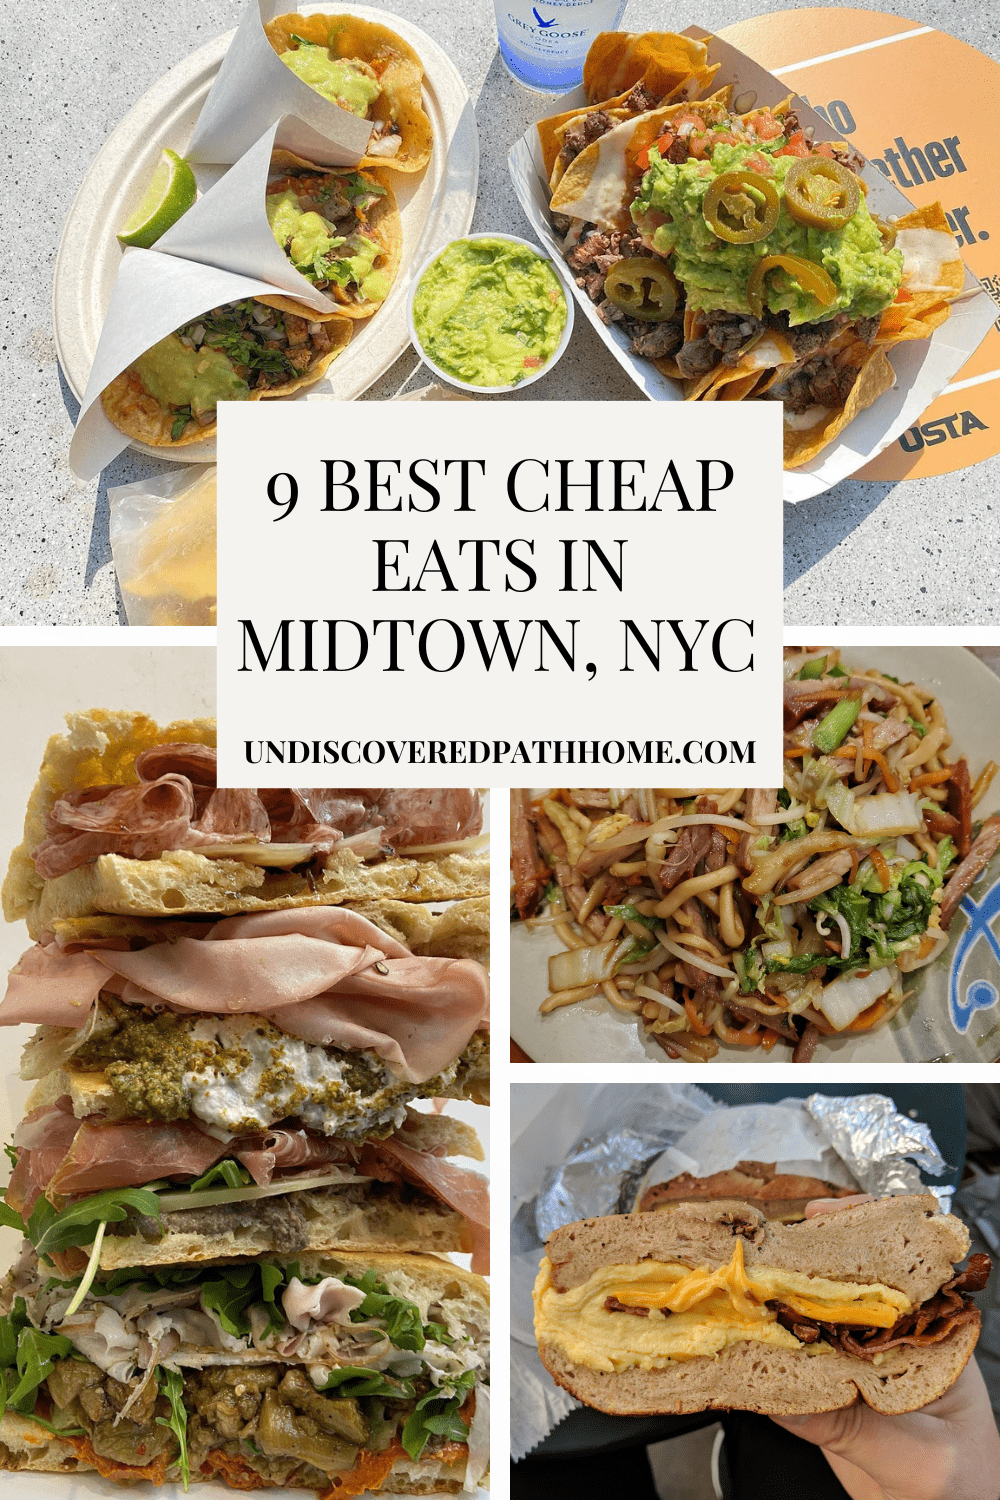 The best cheap eats in Midtown, NYC